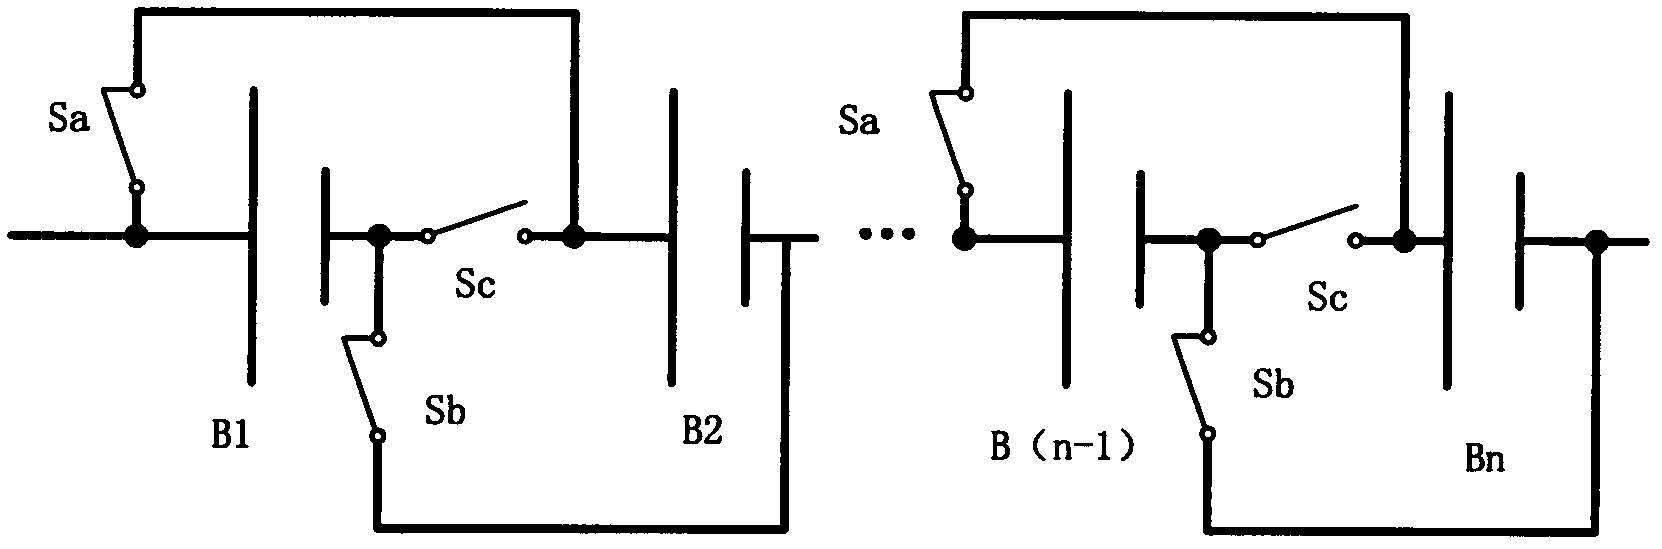 Charging-discharging control circuit of vehicular power battery pack